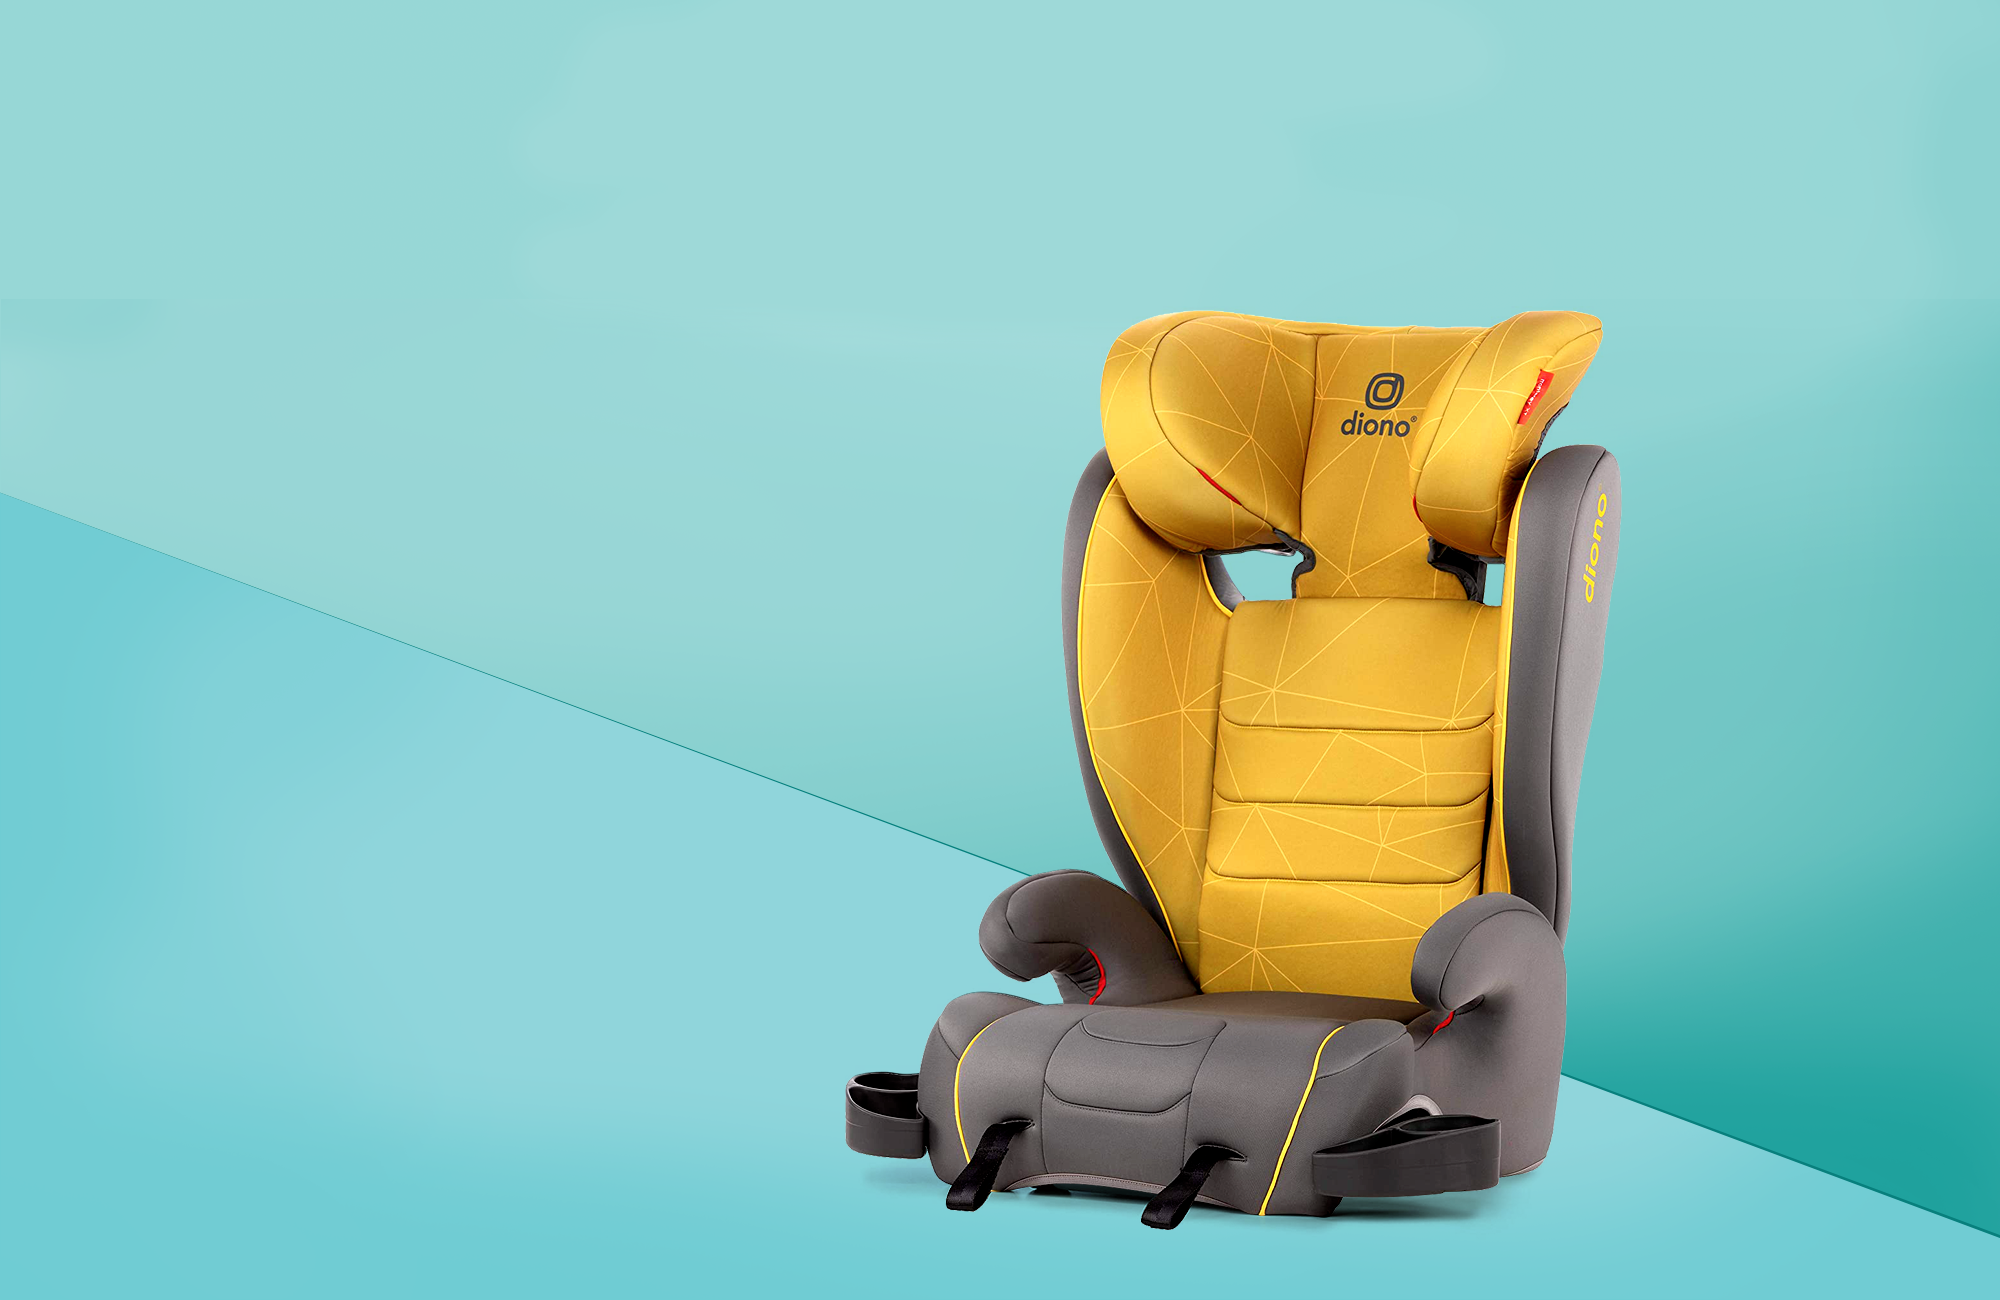 high back booster seat